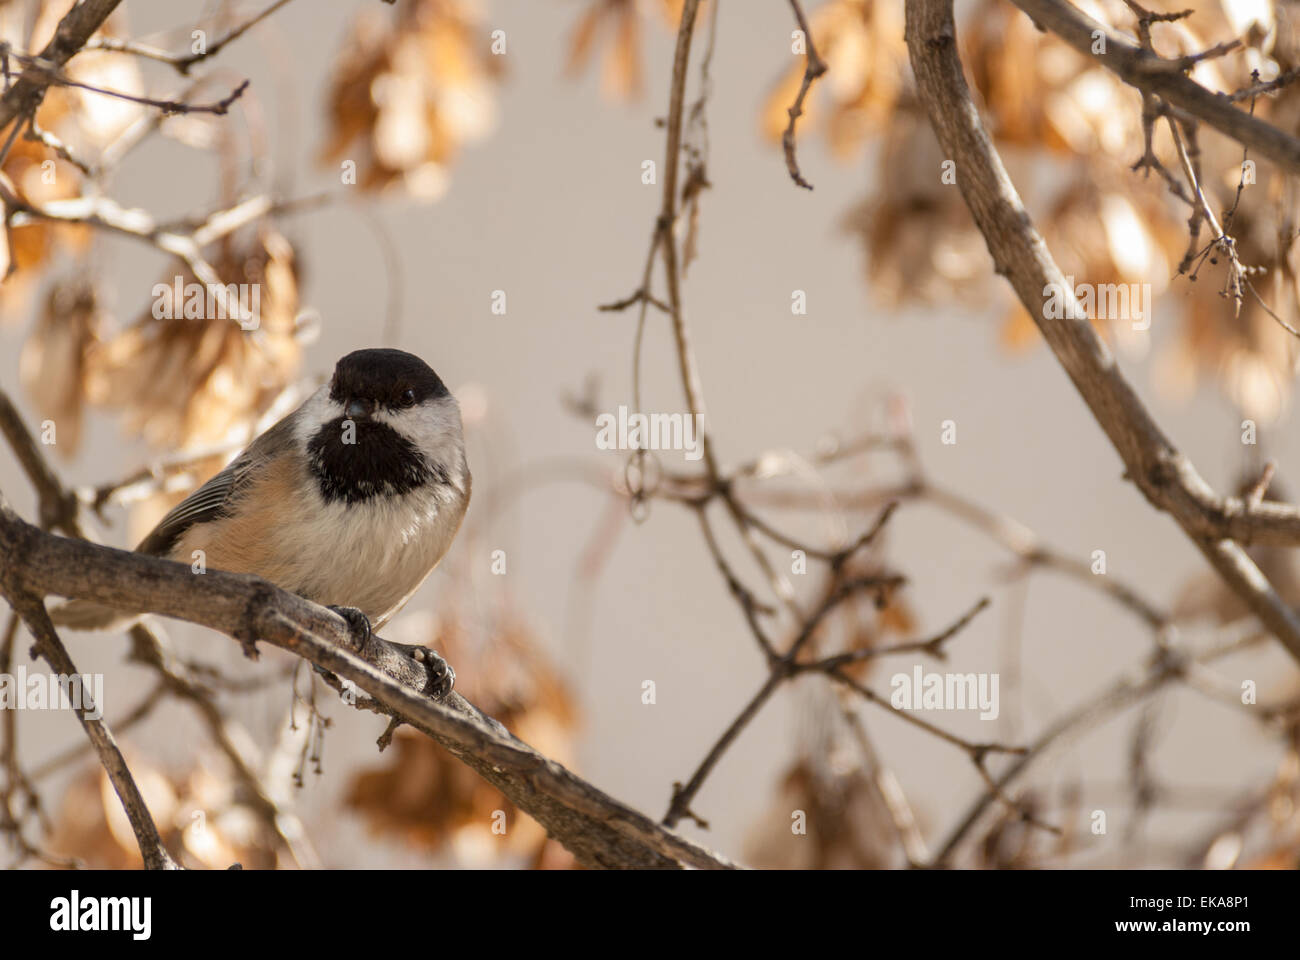 Black-capped chickadee, Poecile atricapillus, sitting in maple tree Stock Photo